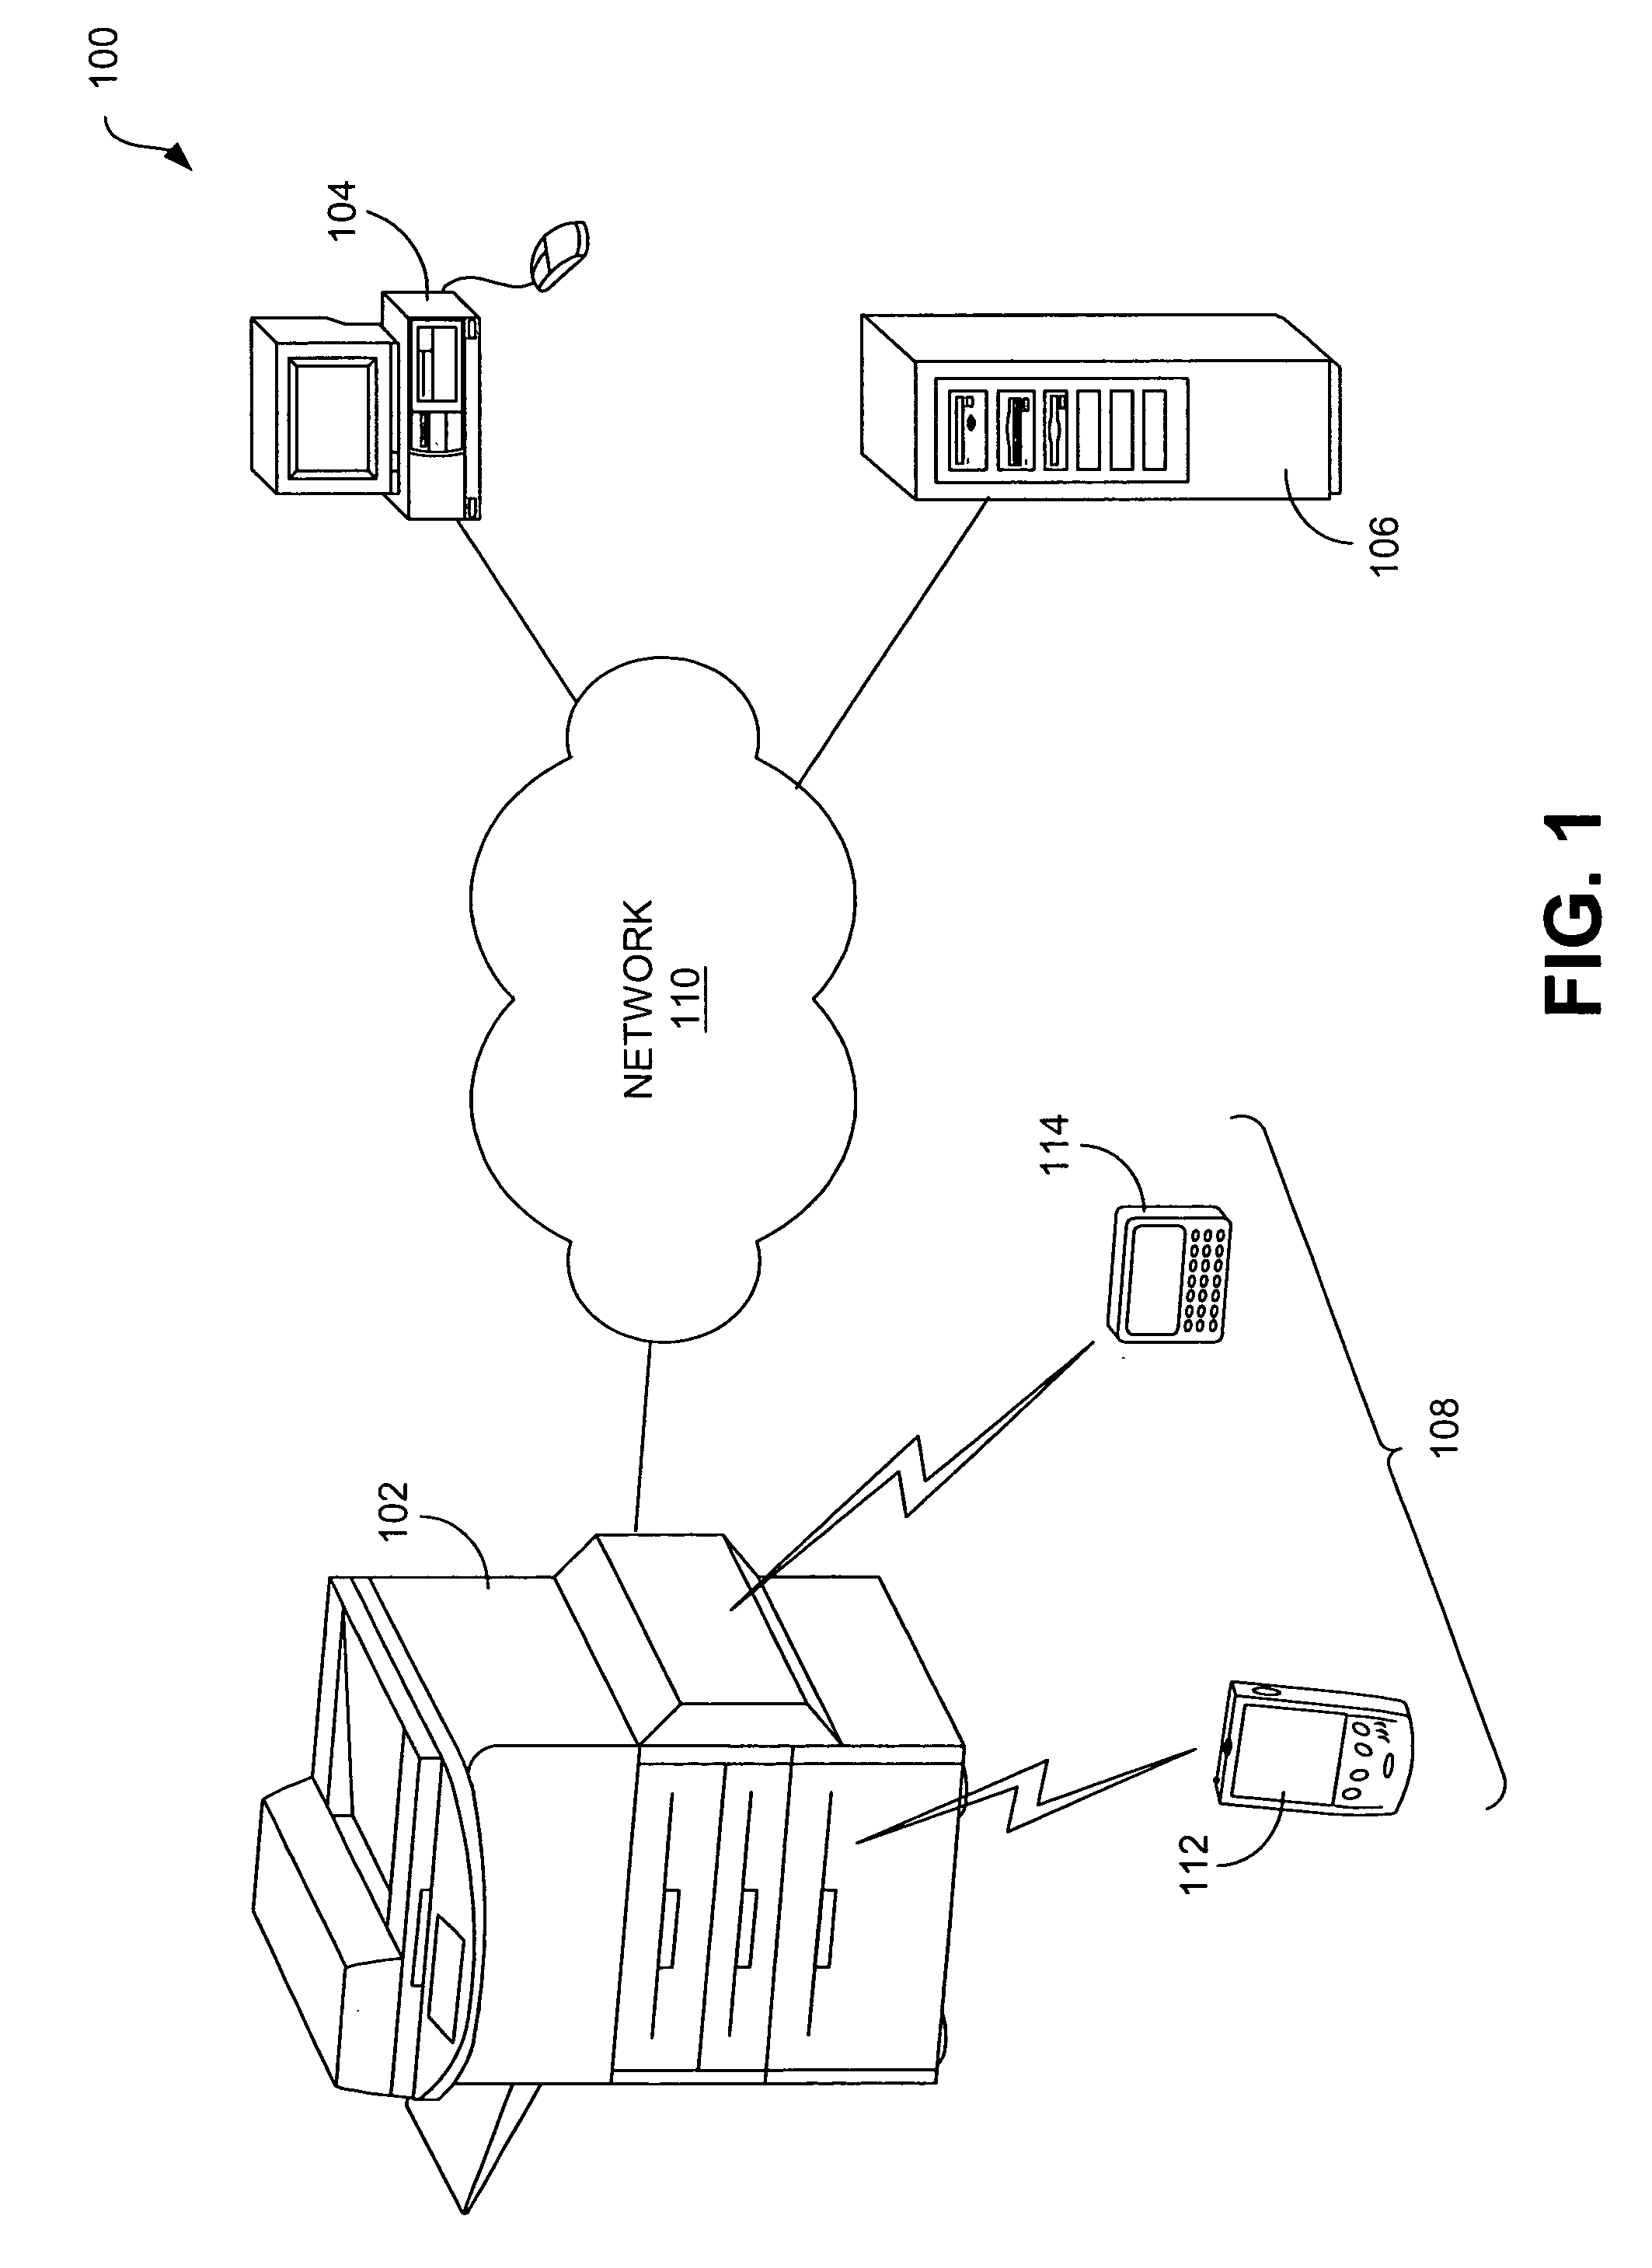 Systems and methods for reporting device problems